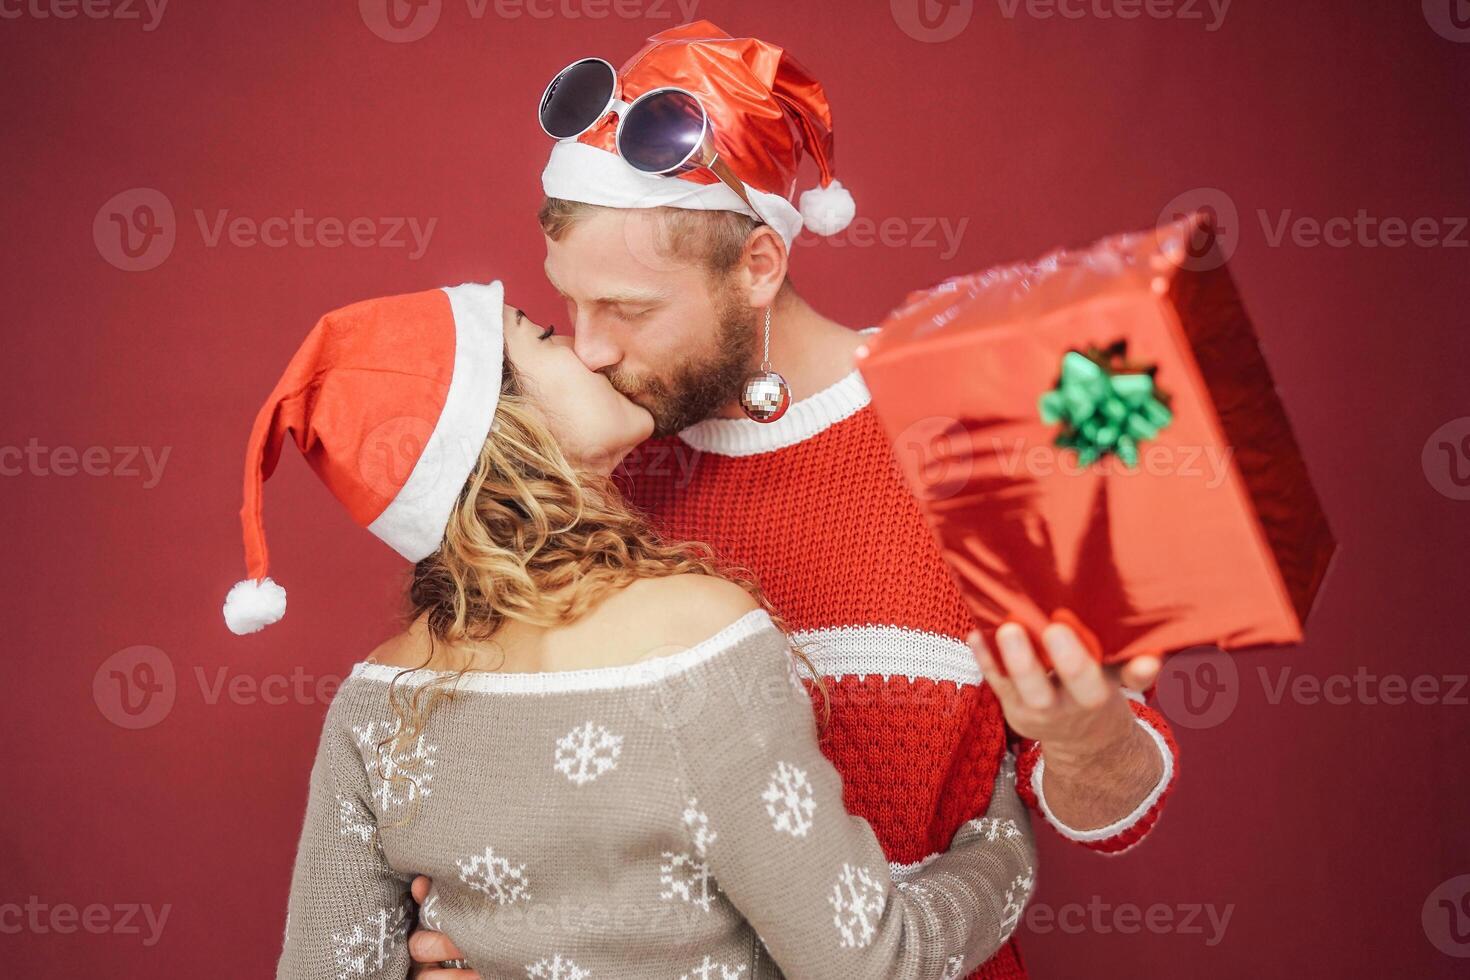 Happy couple kissing at christmas time - Romantic young love story having tender moments during xmas holidays - Relationship, lover and celebration concept photo